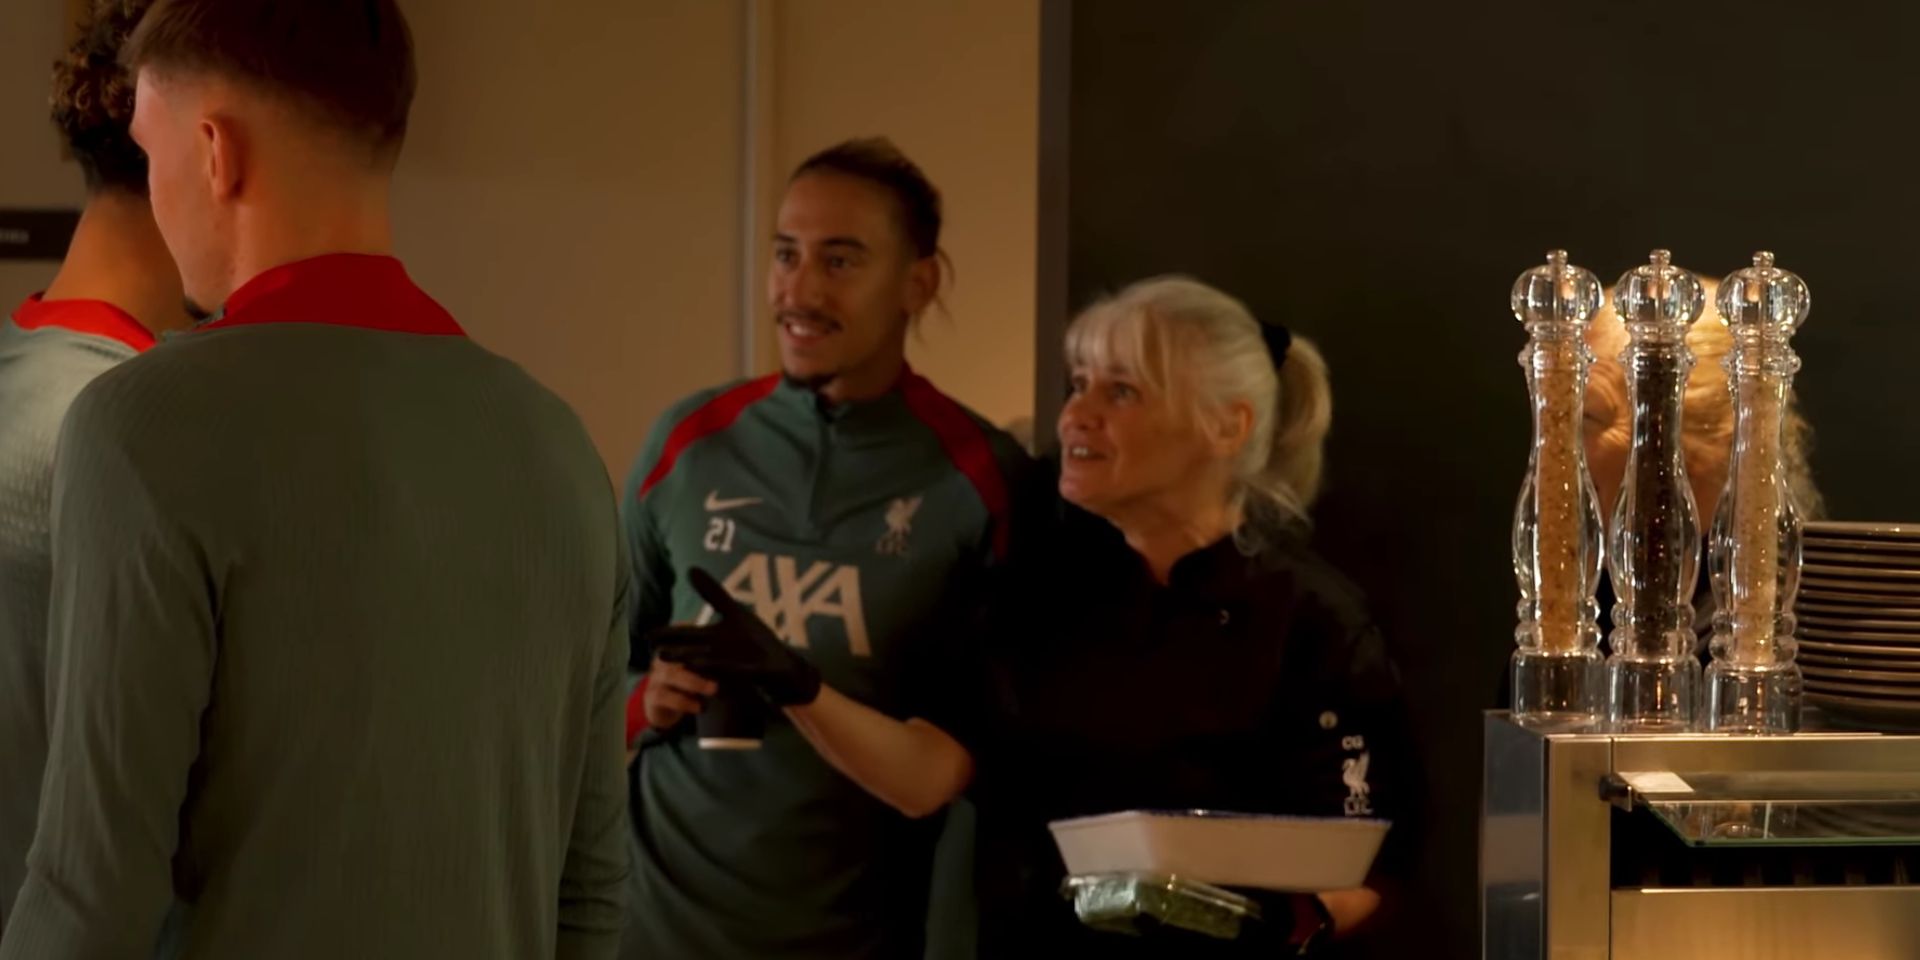 (Video) Why kitchen staff said ‘you’ve changed completely’ to Liverpool player on summer return